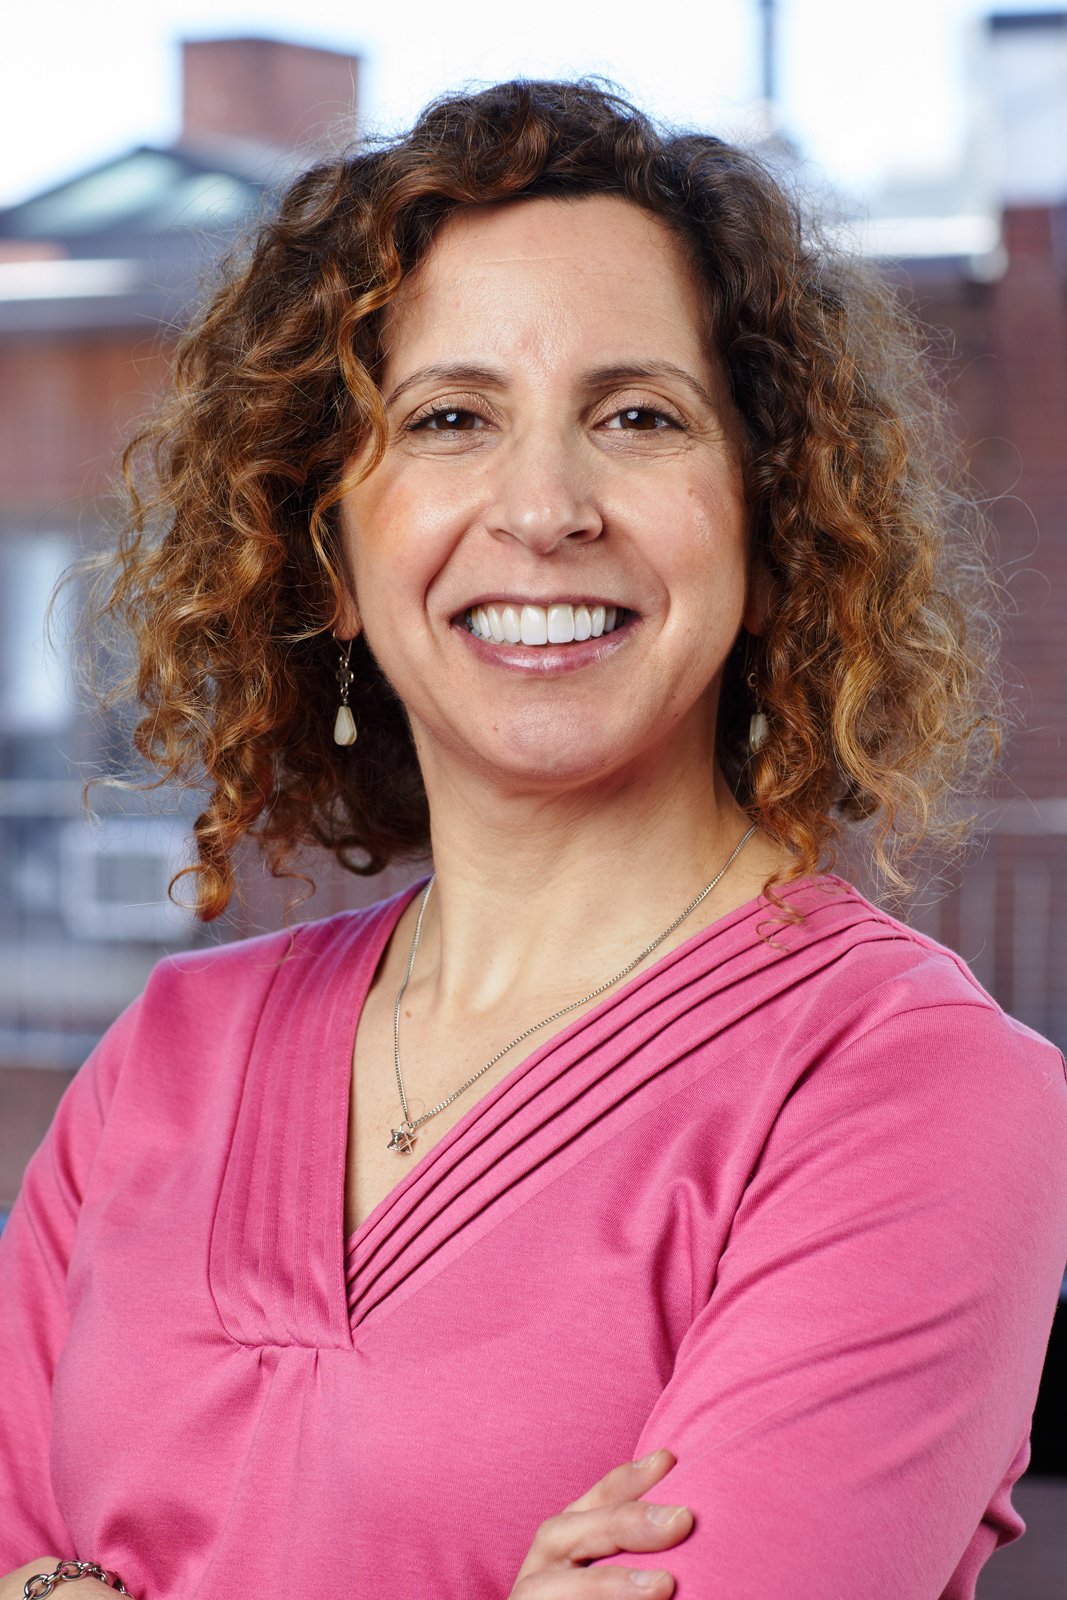 Headshot of woman with brown curly hair wearing a pink shirt.  She is smiling at the camera in front of a background of brick buildings.